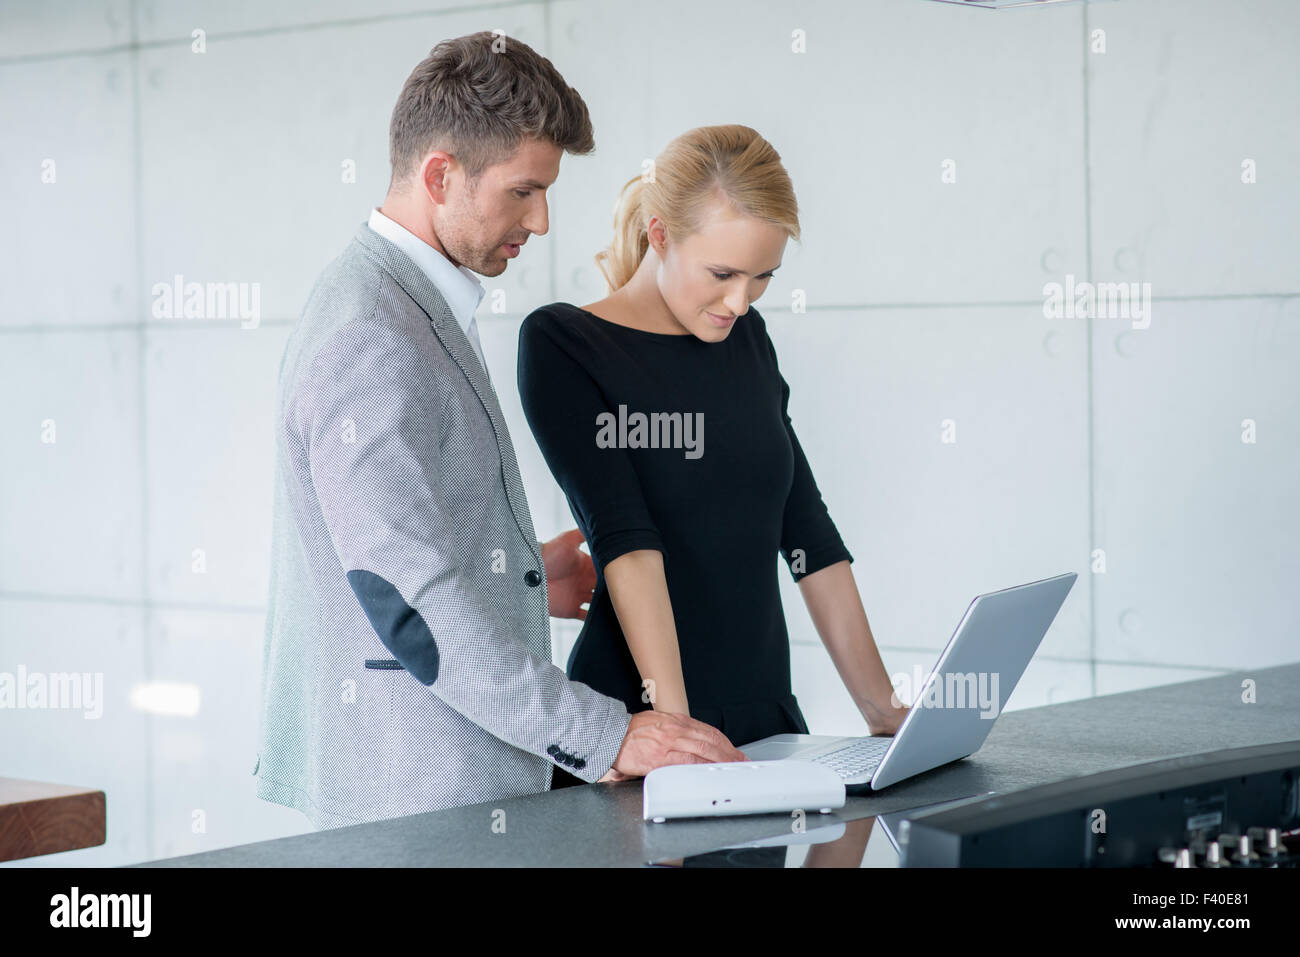 Professional Couple Looking Down at Laptop Stock Photo